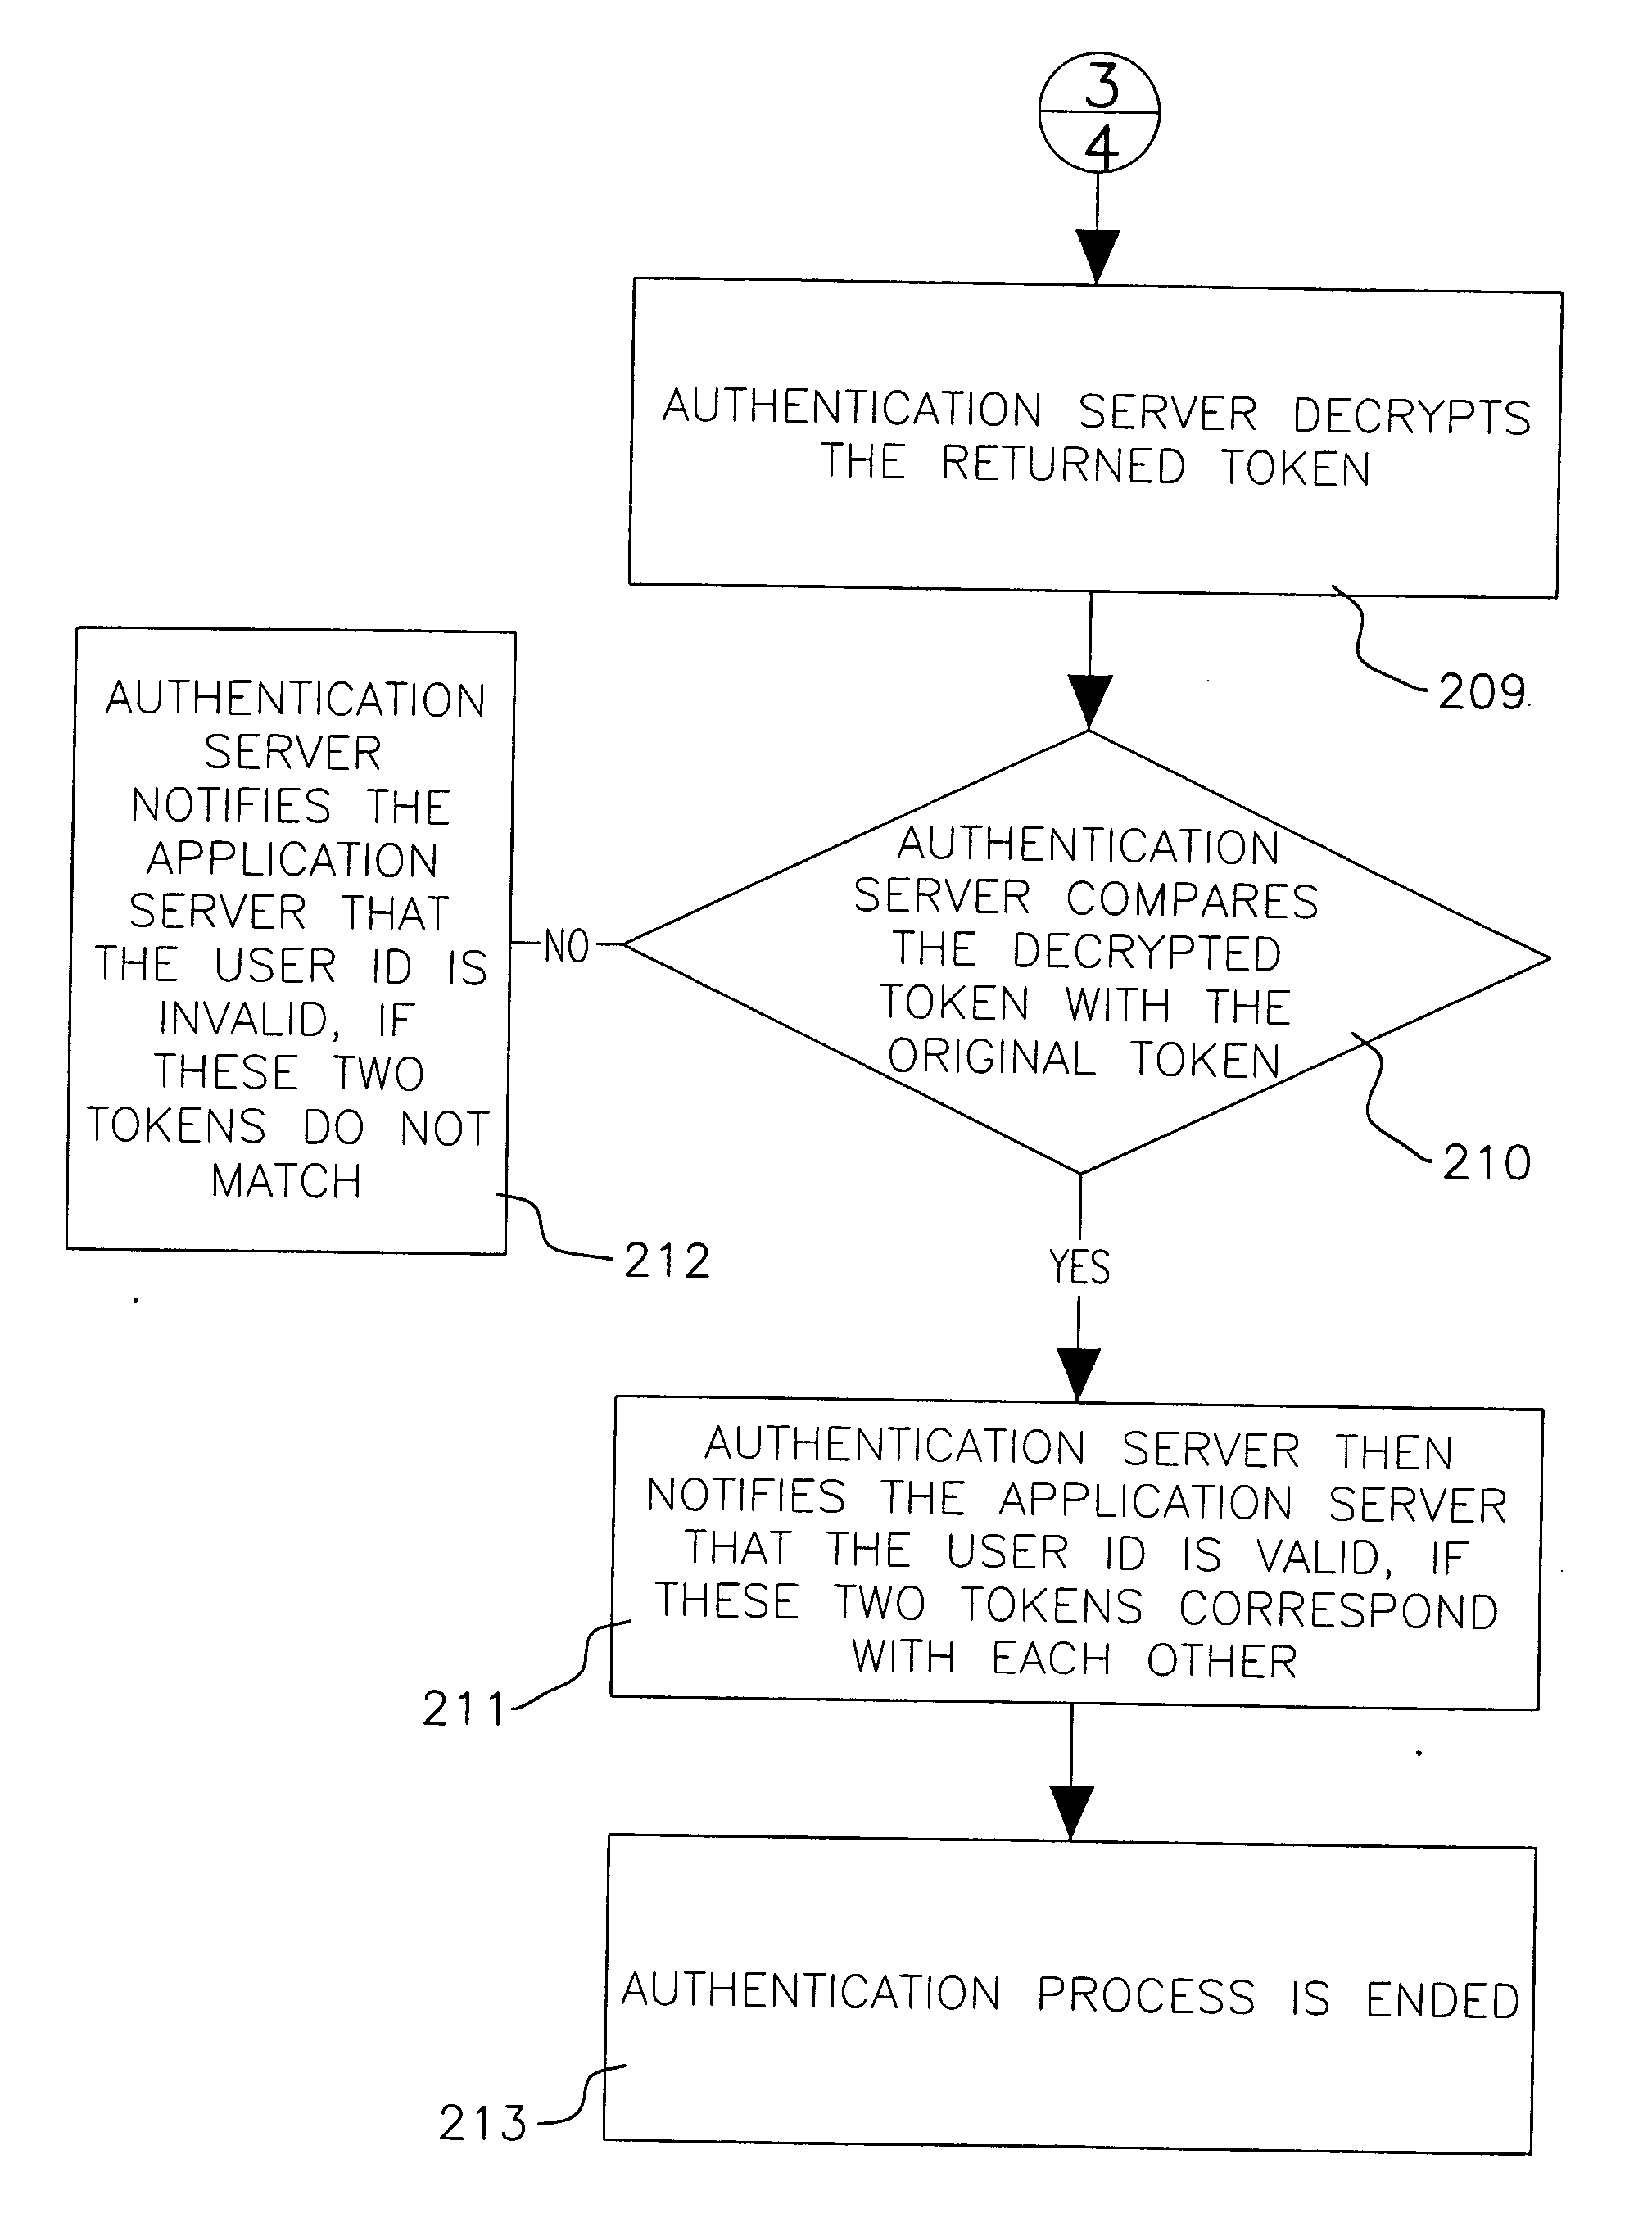 Method of authenticating user access to network stations